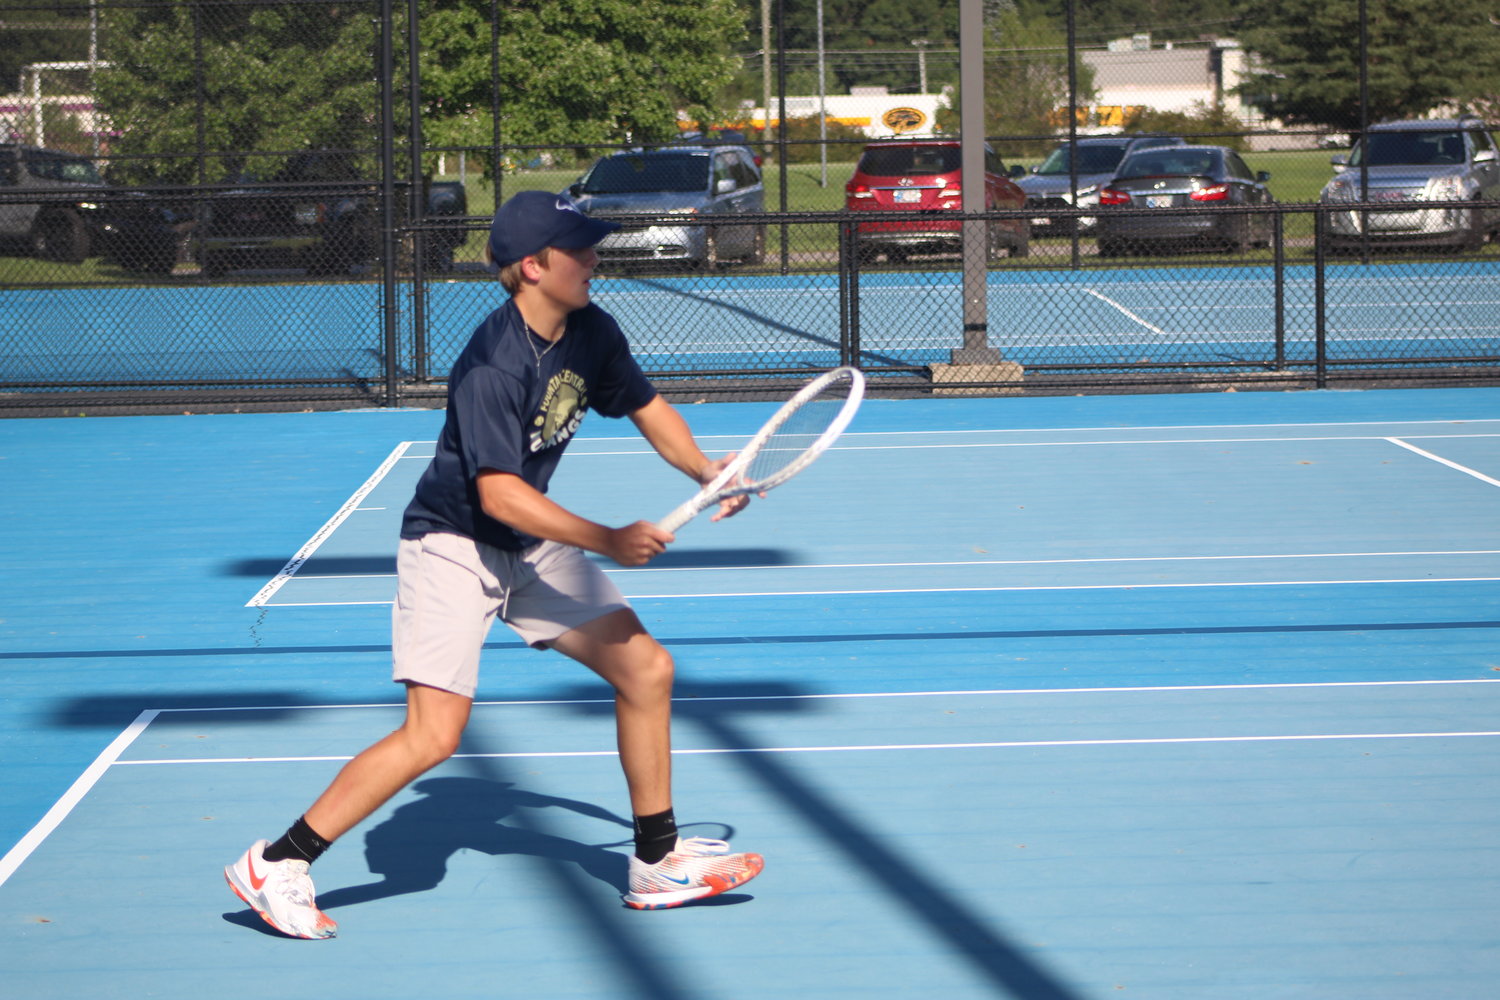 Noah Armstrong won a decisive three set match at 3 singles for Fountain Central which helped them defeat Crawfordsville 3-2 in their season opener.